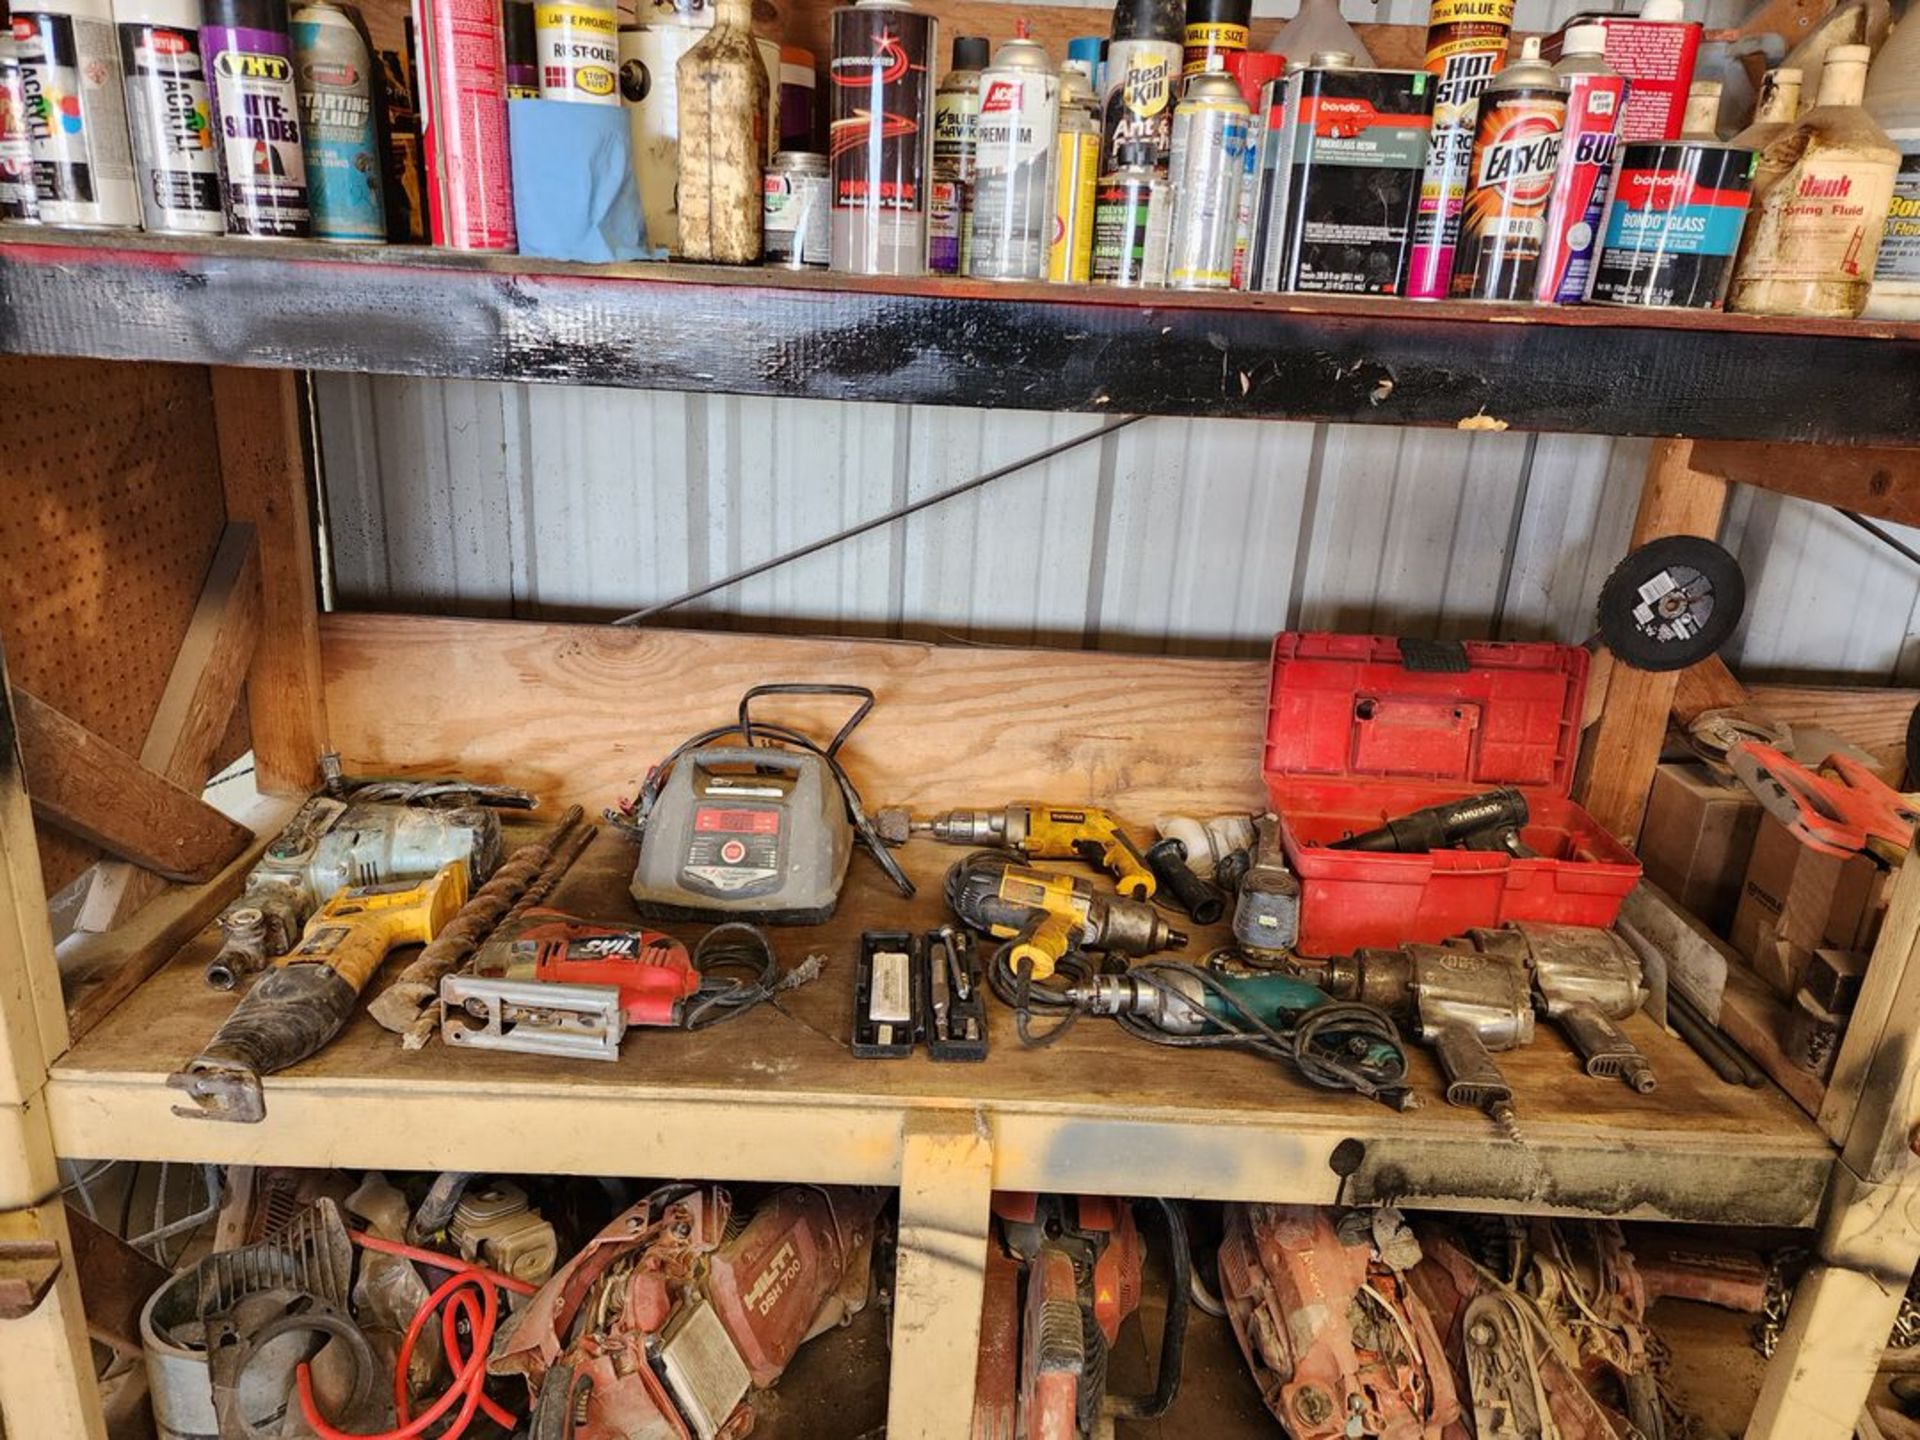 Contents Of Rack To Include But Not Limited To: (Welder Excluded) Assorted Power Tools; Drills; - Image 3 of 49